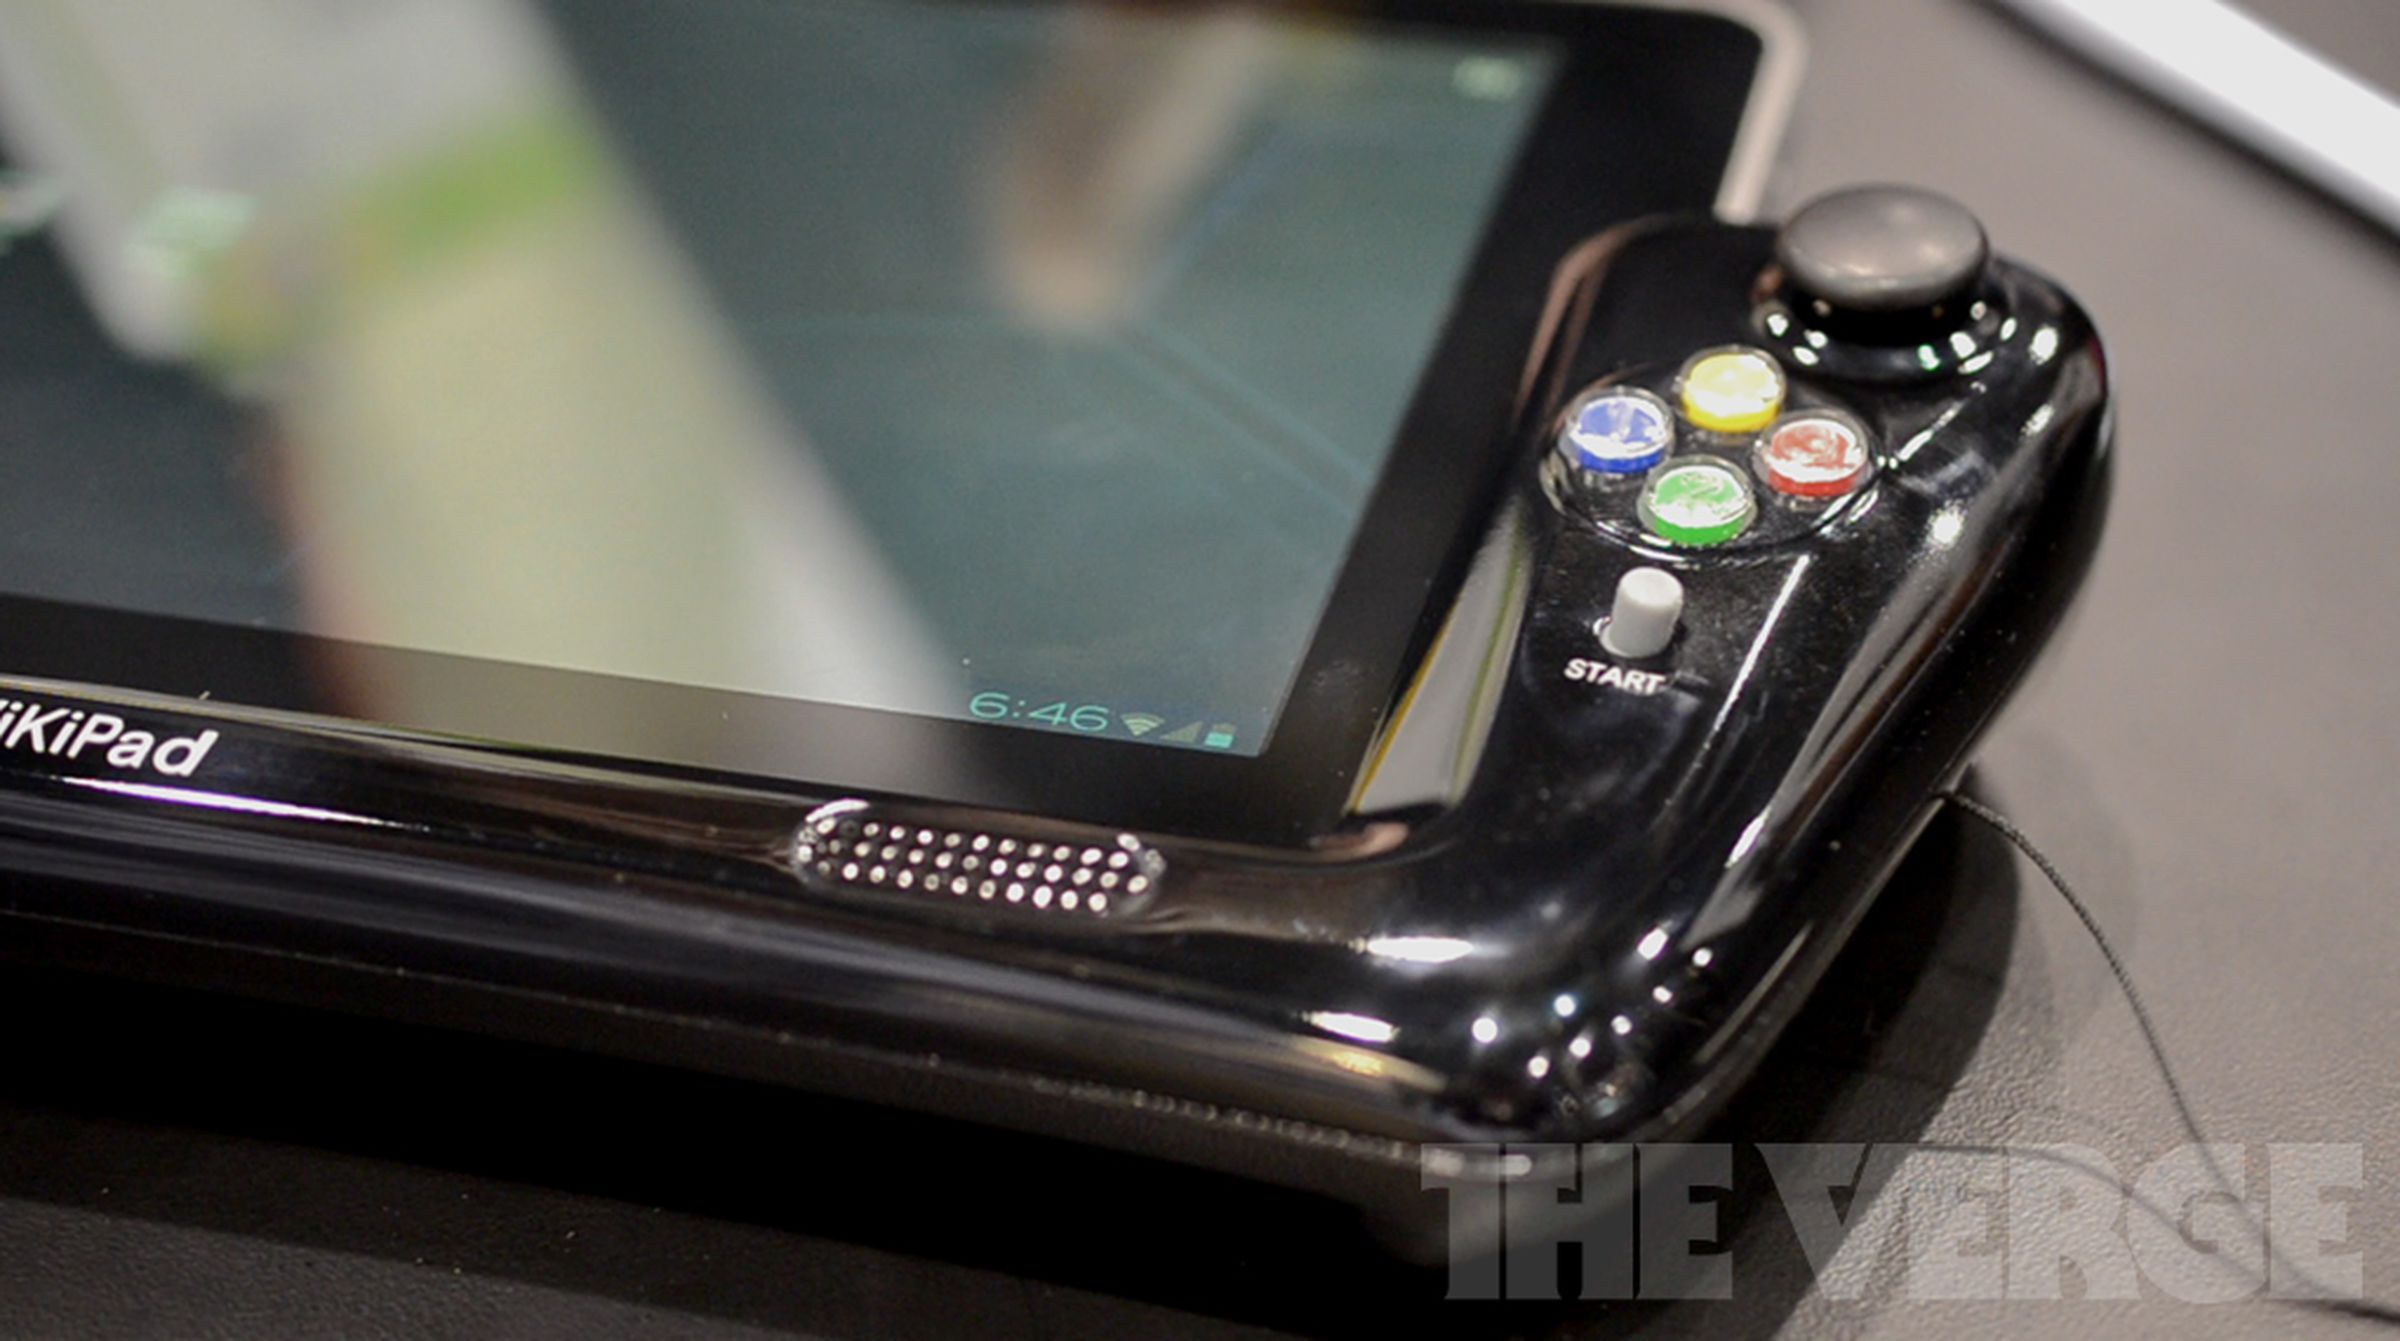 WikiPad:3D glasses-free Android 4.0 tablet (hands-on photos)